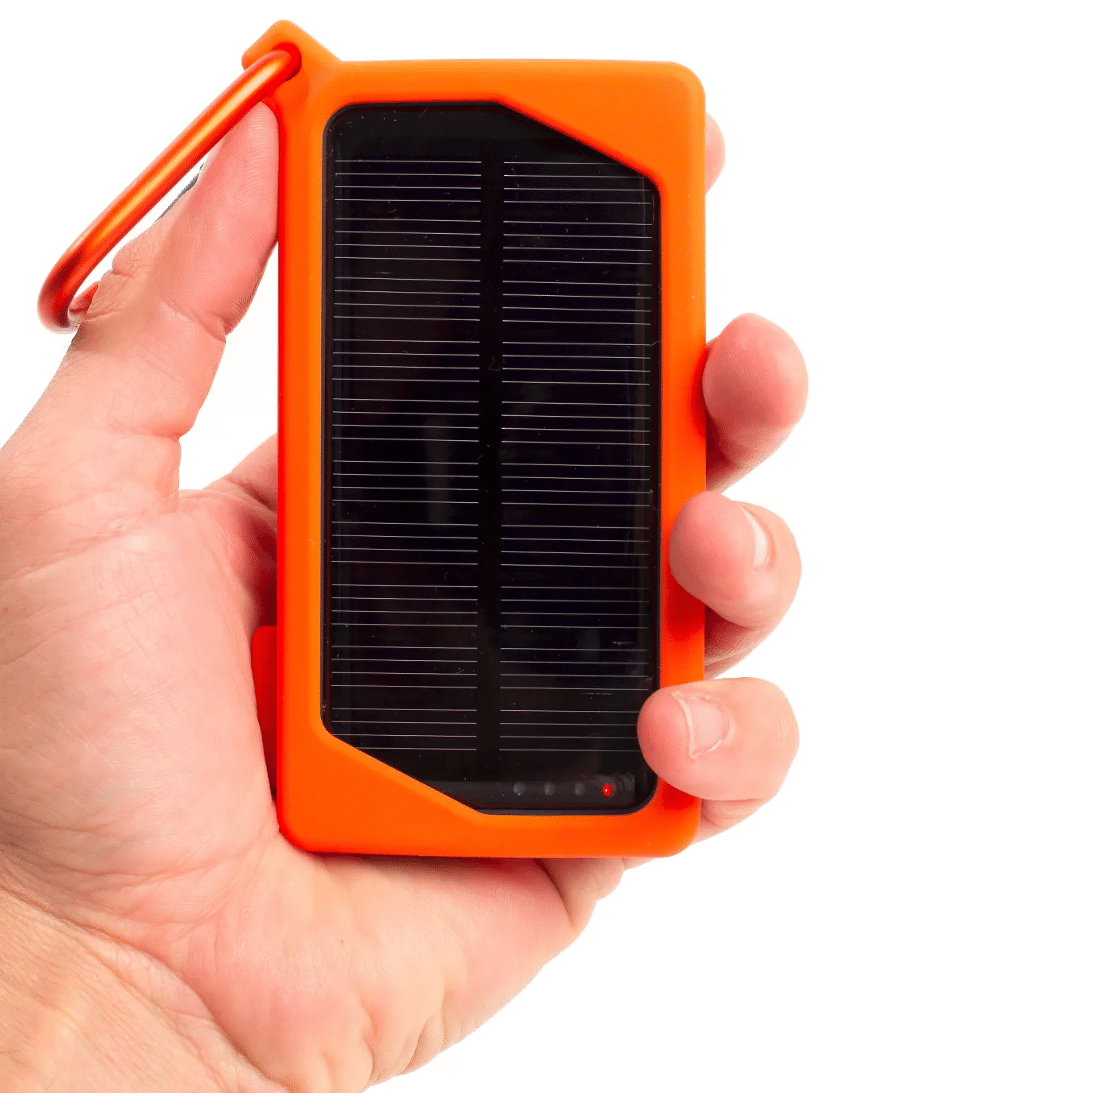 Power bank with solar charger being in a hand to see the real scale for the product